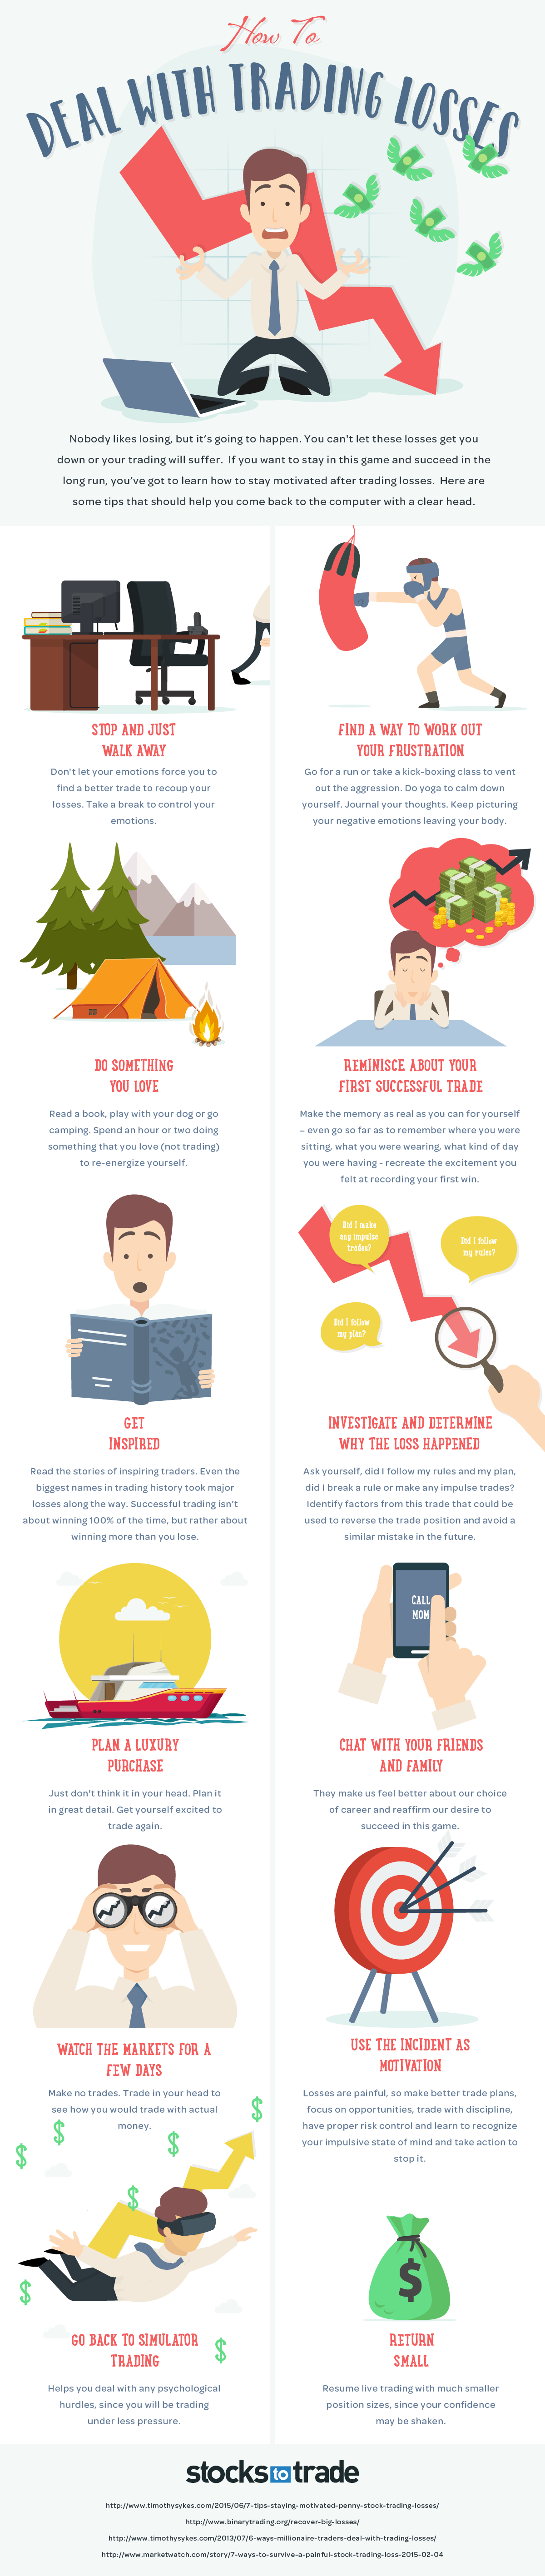 How to Deal with Trading Losses {INFOGRAPHIC}